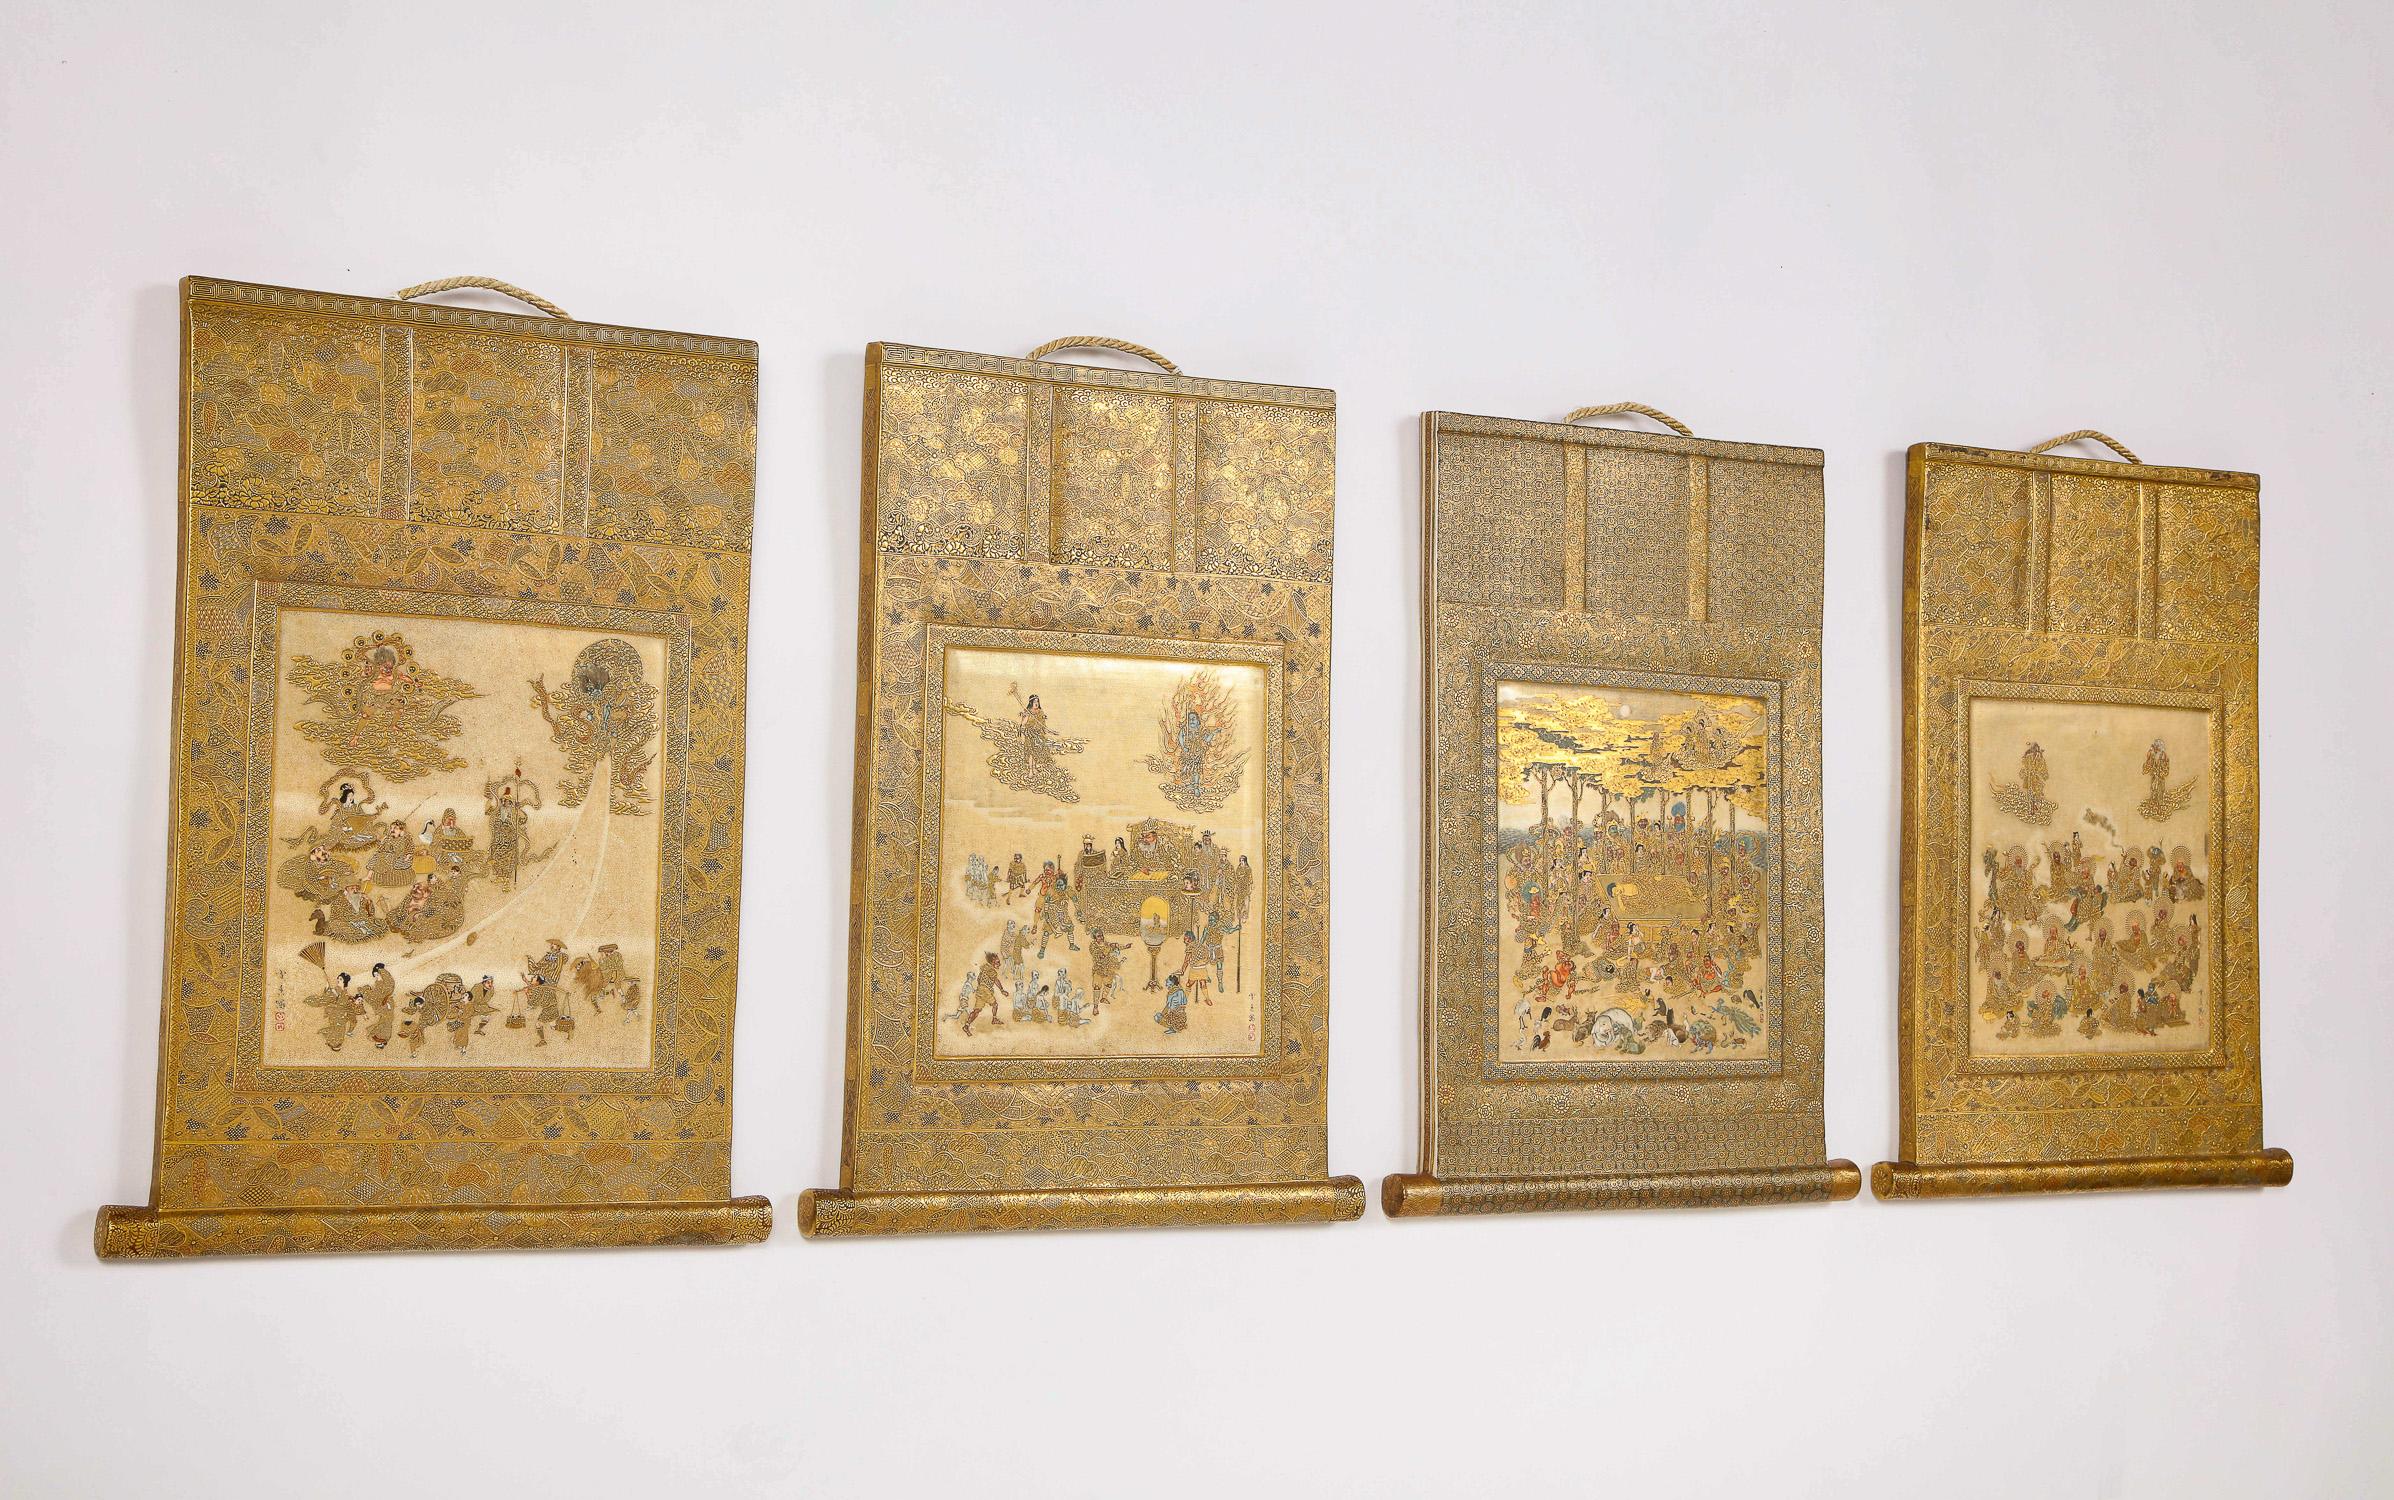 A magnificent four-piece set of Elaborate Japanese Satsuma Plaques of the Meiji Period (1868-1912), signed Sekko Sha, Watanabe Sekko, Marked Hododa and with Shimazu Crest. Each fashioned in the form of a hanging scroll (kakemono) with a magnificent